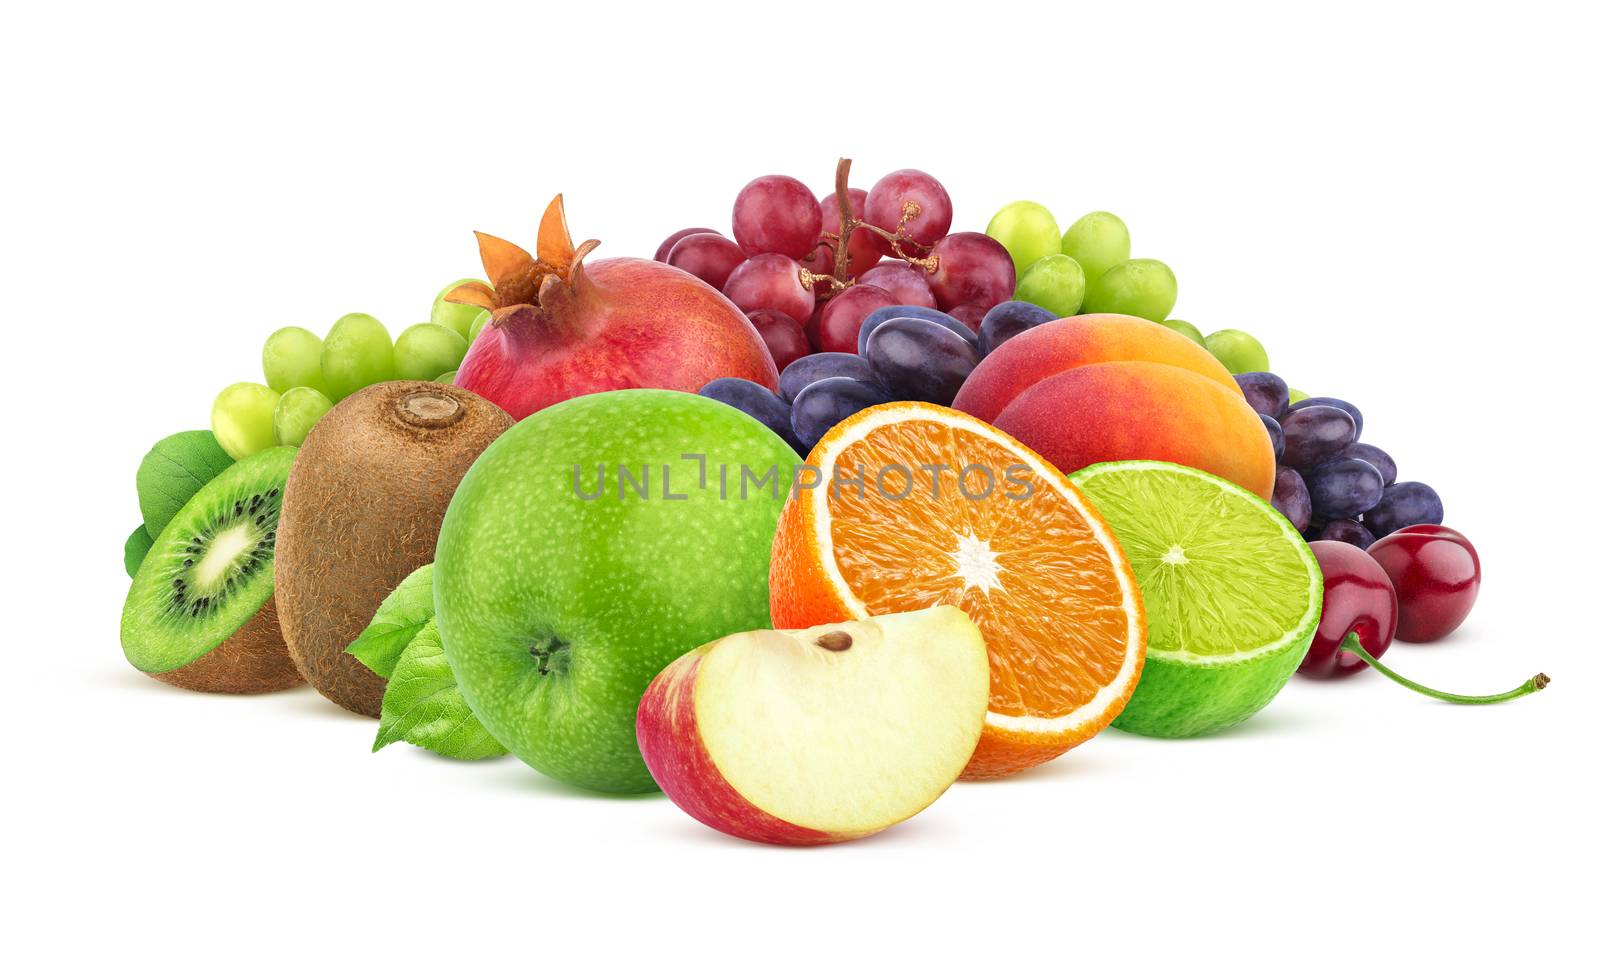 Heap of different fruits and berries isolated on white background with clipping path